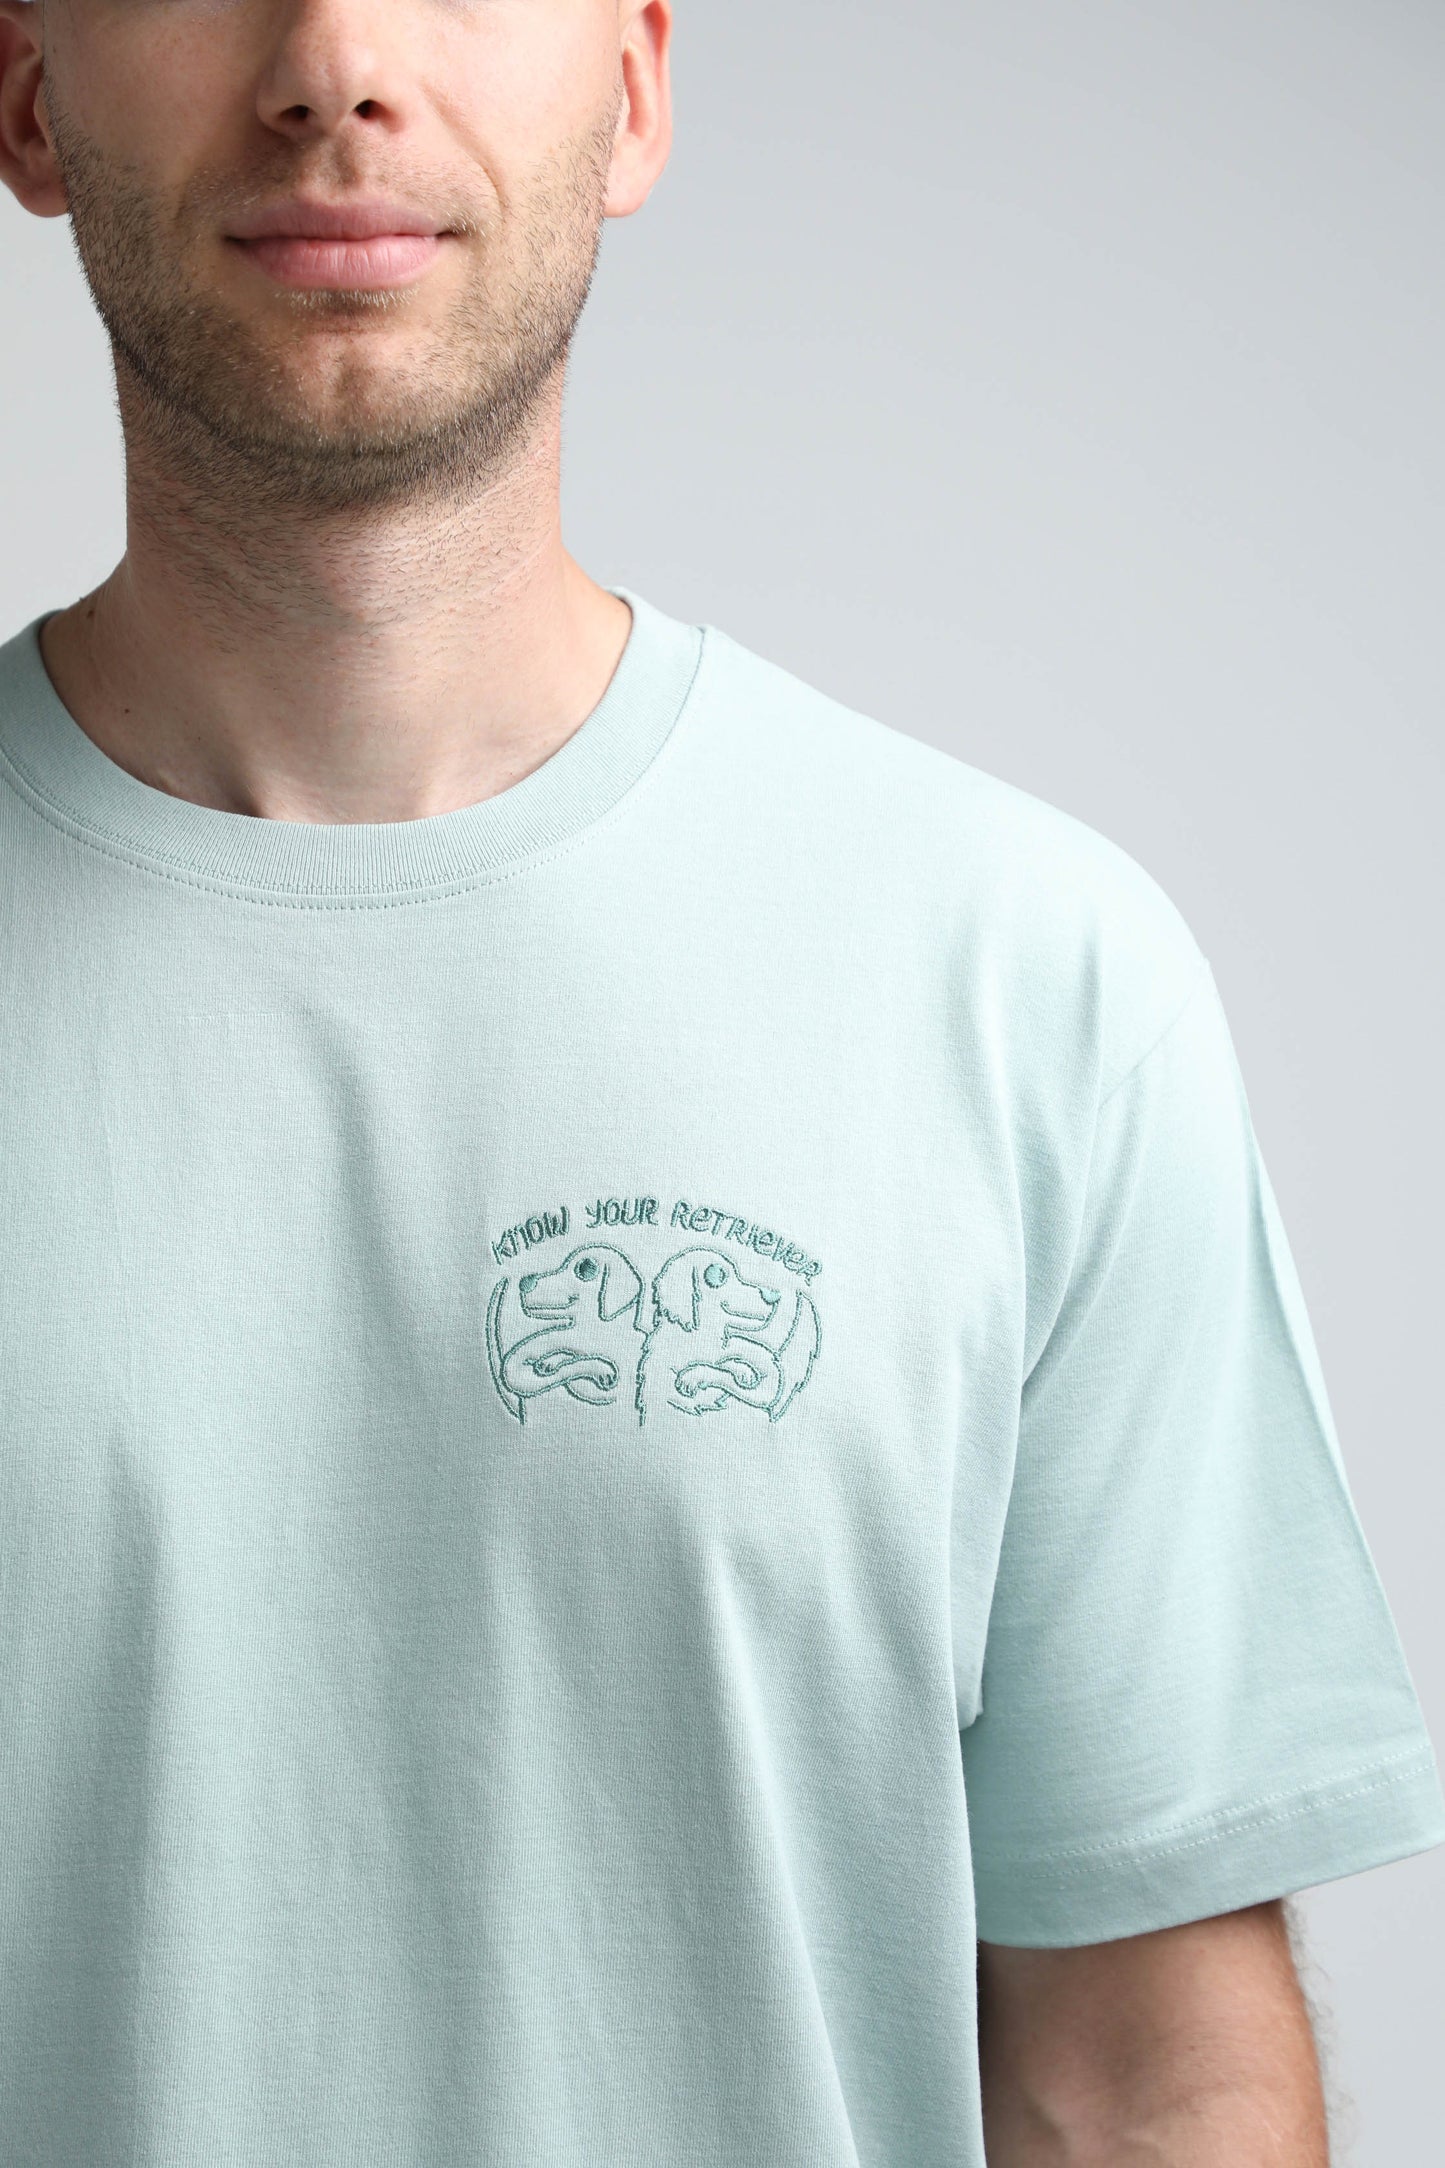 -25% | XL available only | Know your retriever | Heavyweight T-Shirt with embroidered dogs. Oversized | Unisex - premium dog goods handmade in Europe by My Wild Other